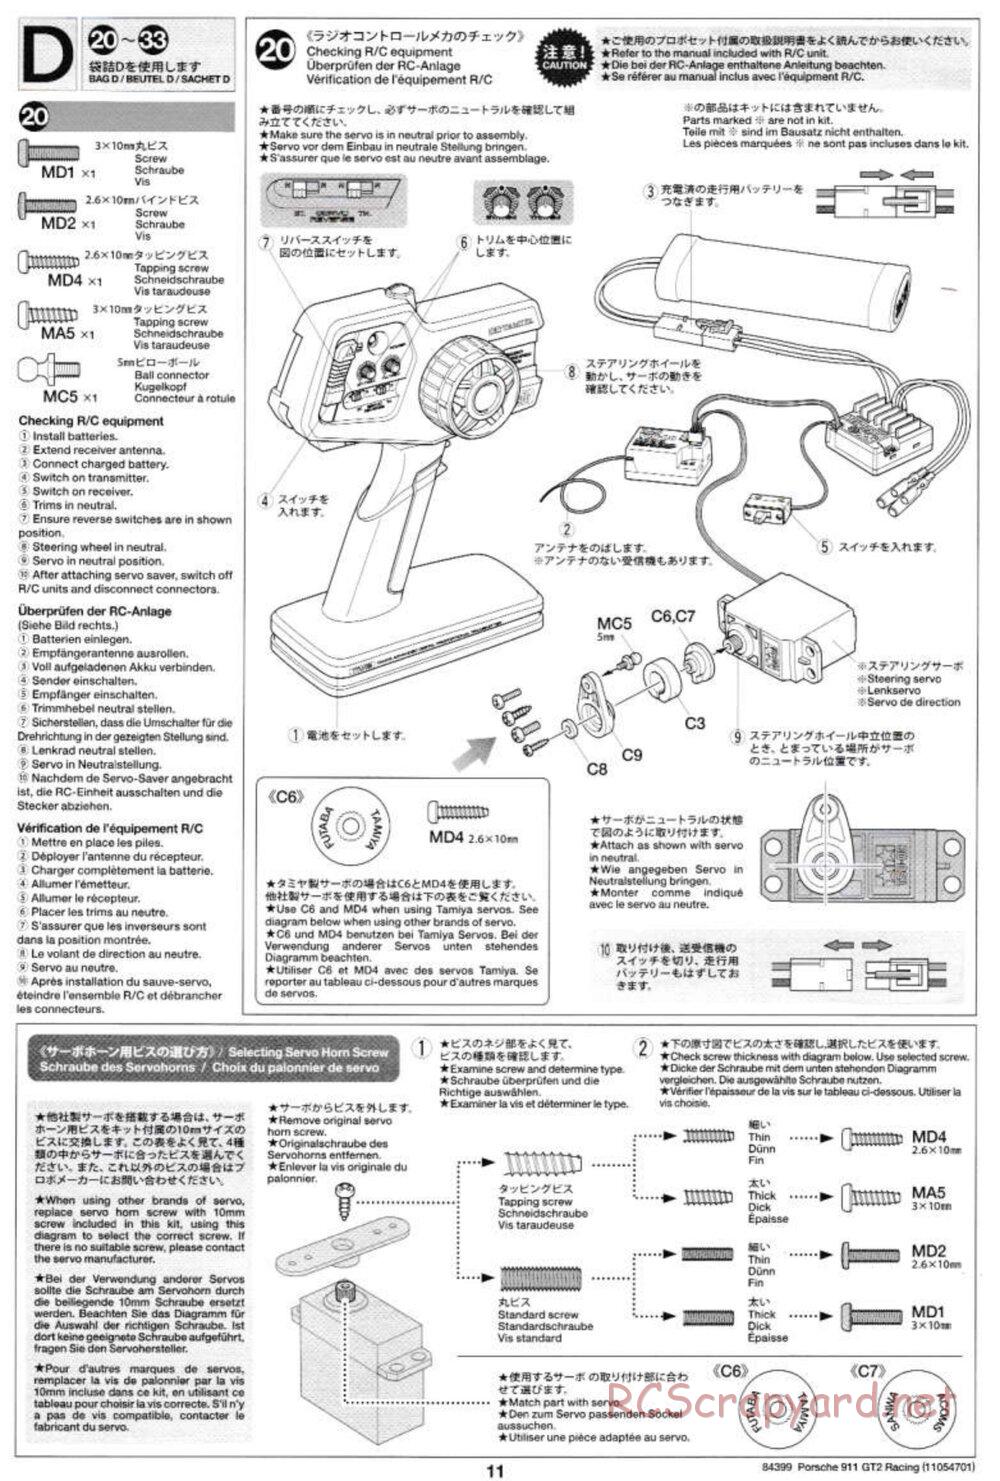 Tamiya - Porsche 911 GT2 Racing - TA-02SW Chassis - Manual - Page 11